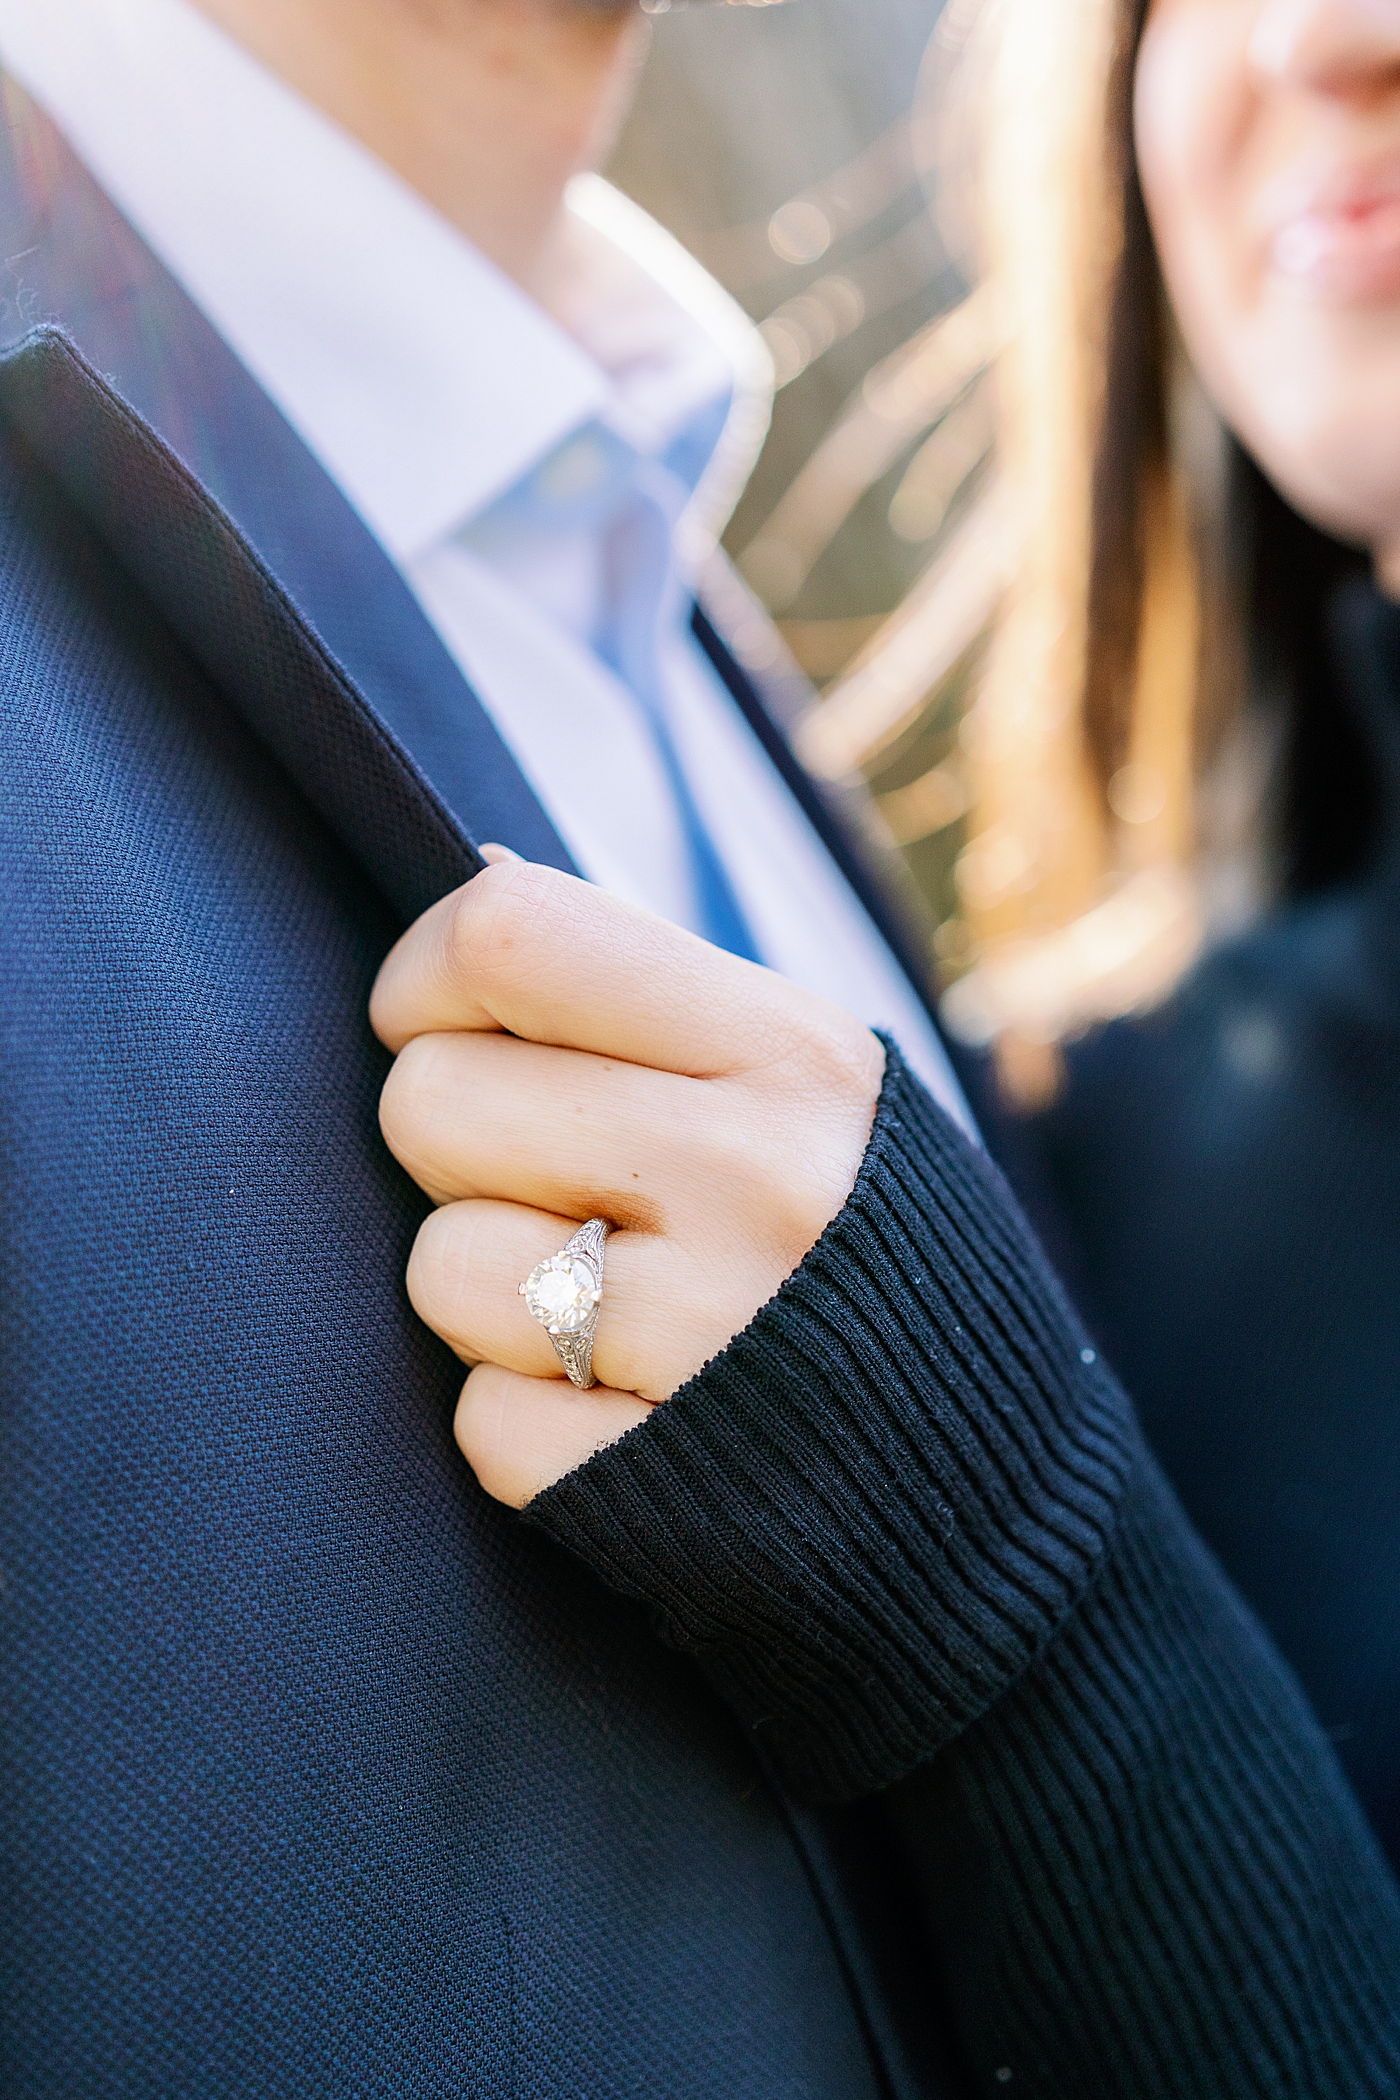 Detail of bride to be's ring on her hand holding groom's lapel | Image by Annie Laura Photo